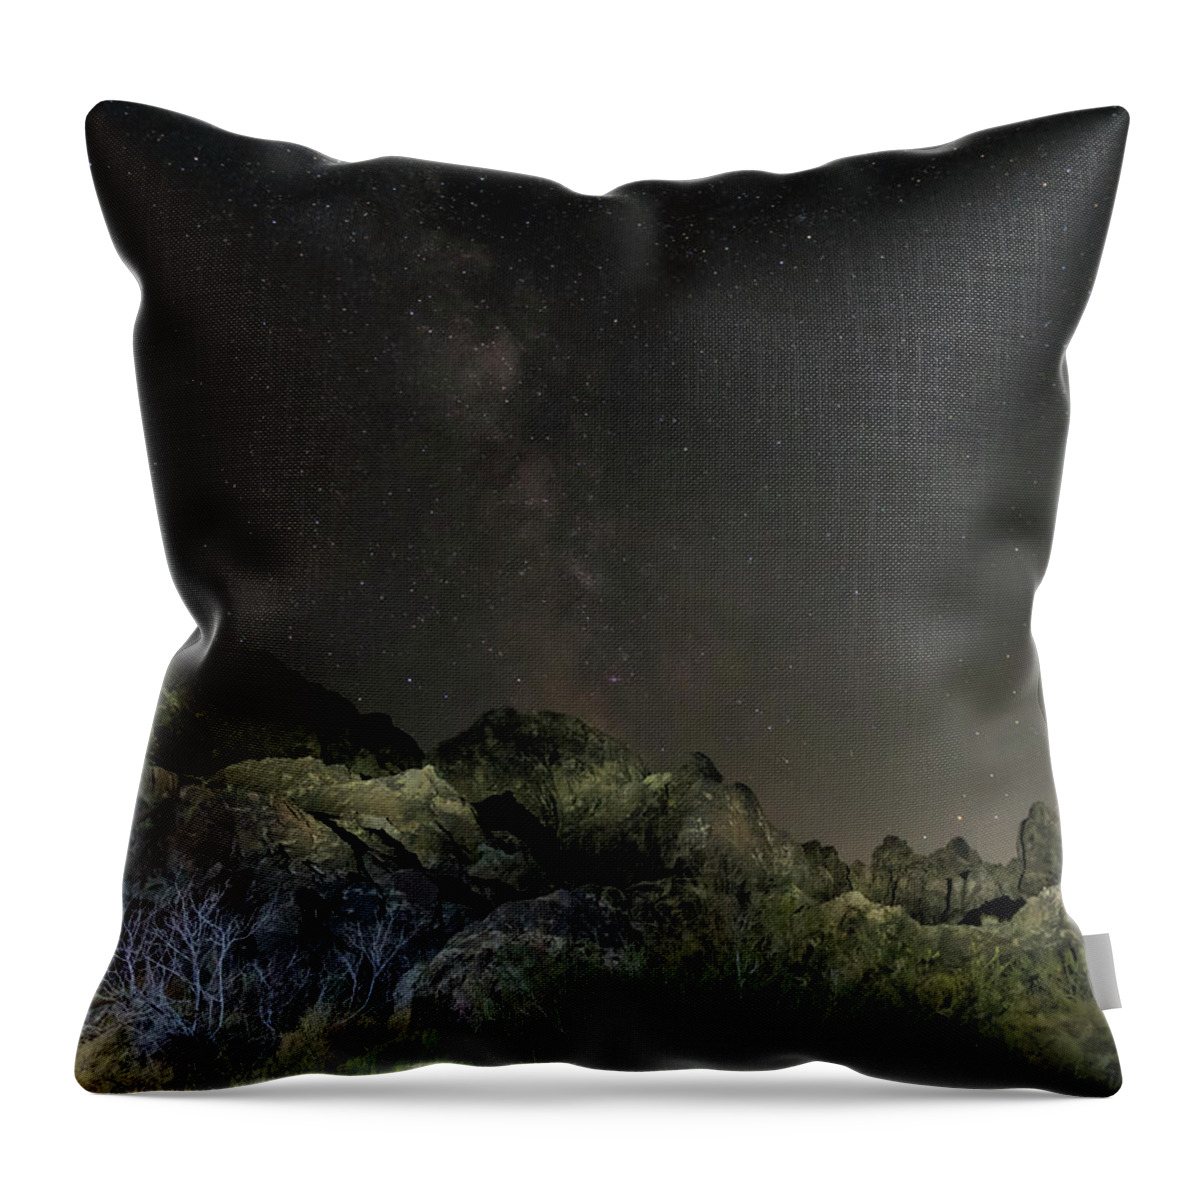 Milkyway Throw Pillow featuring the photograph Rise by Daniel Hayes